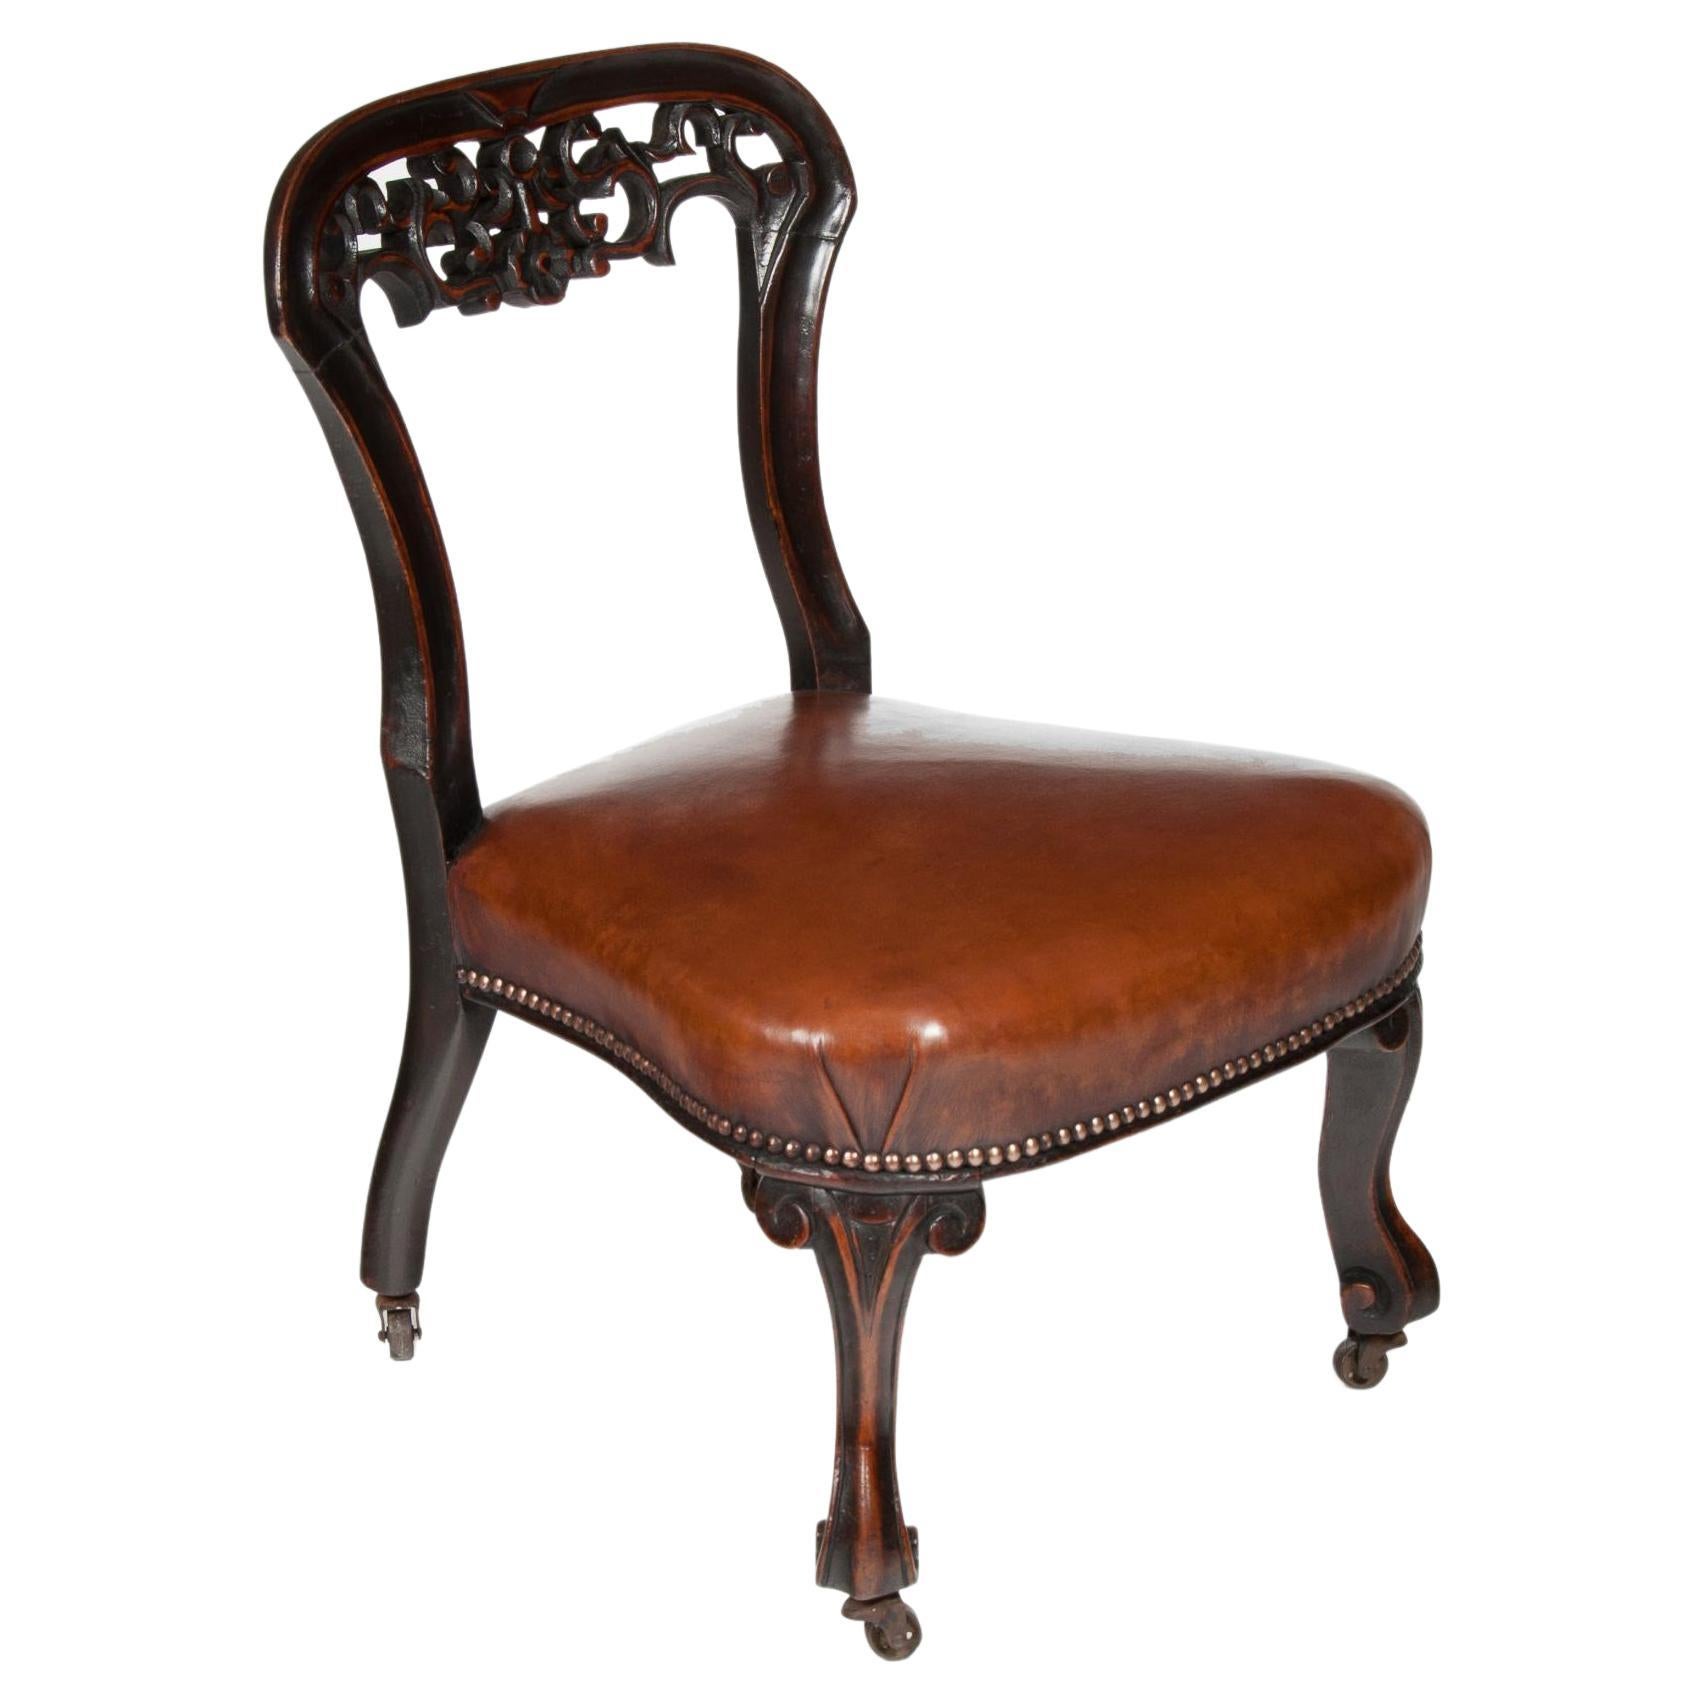 Rare Victorian Mahogany Leather Upholstered Childs Chair For Sale